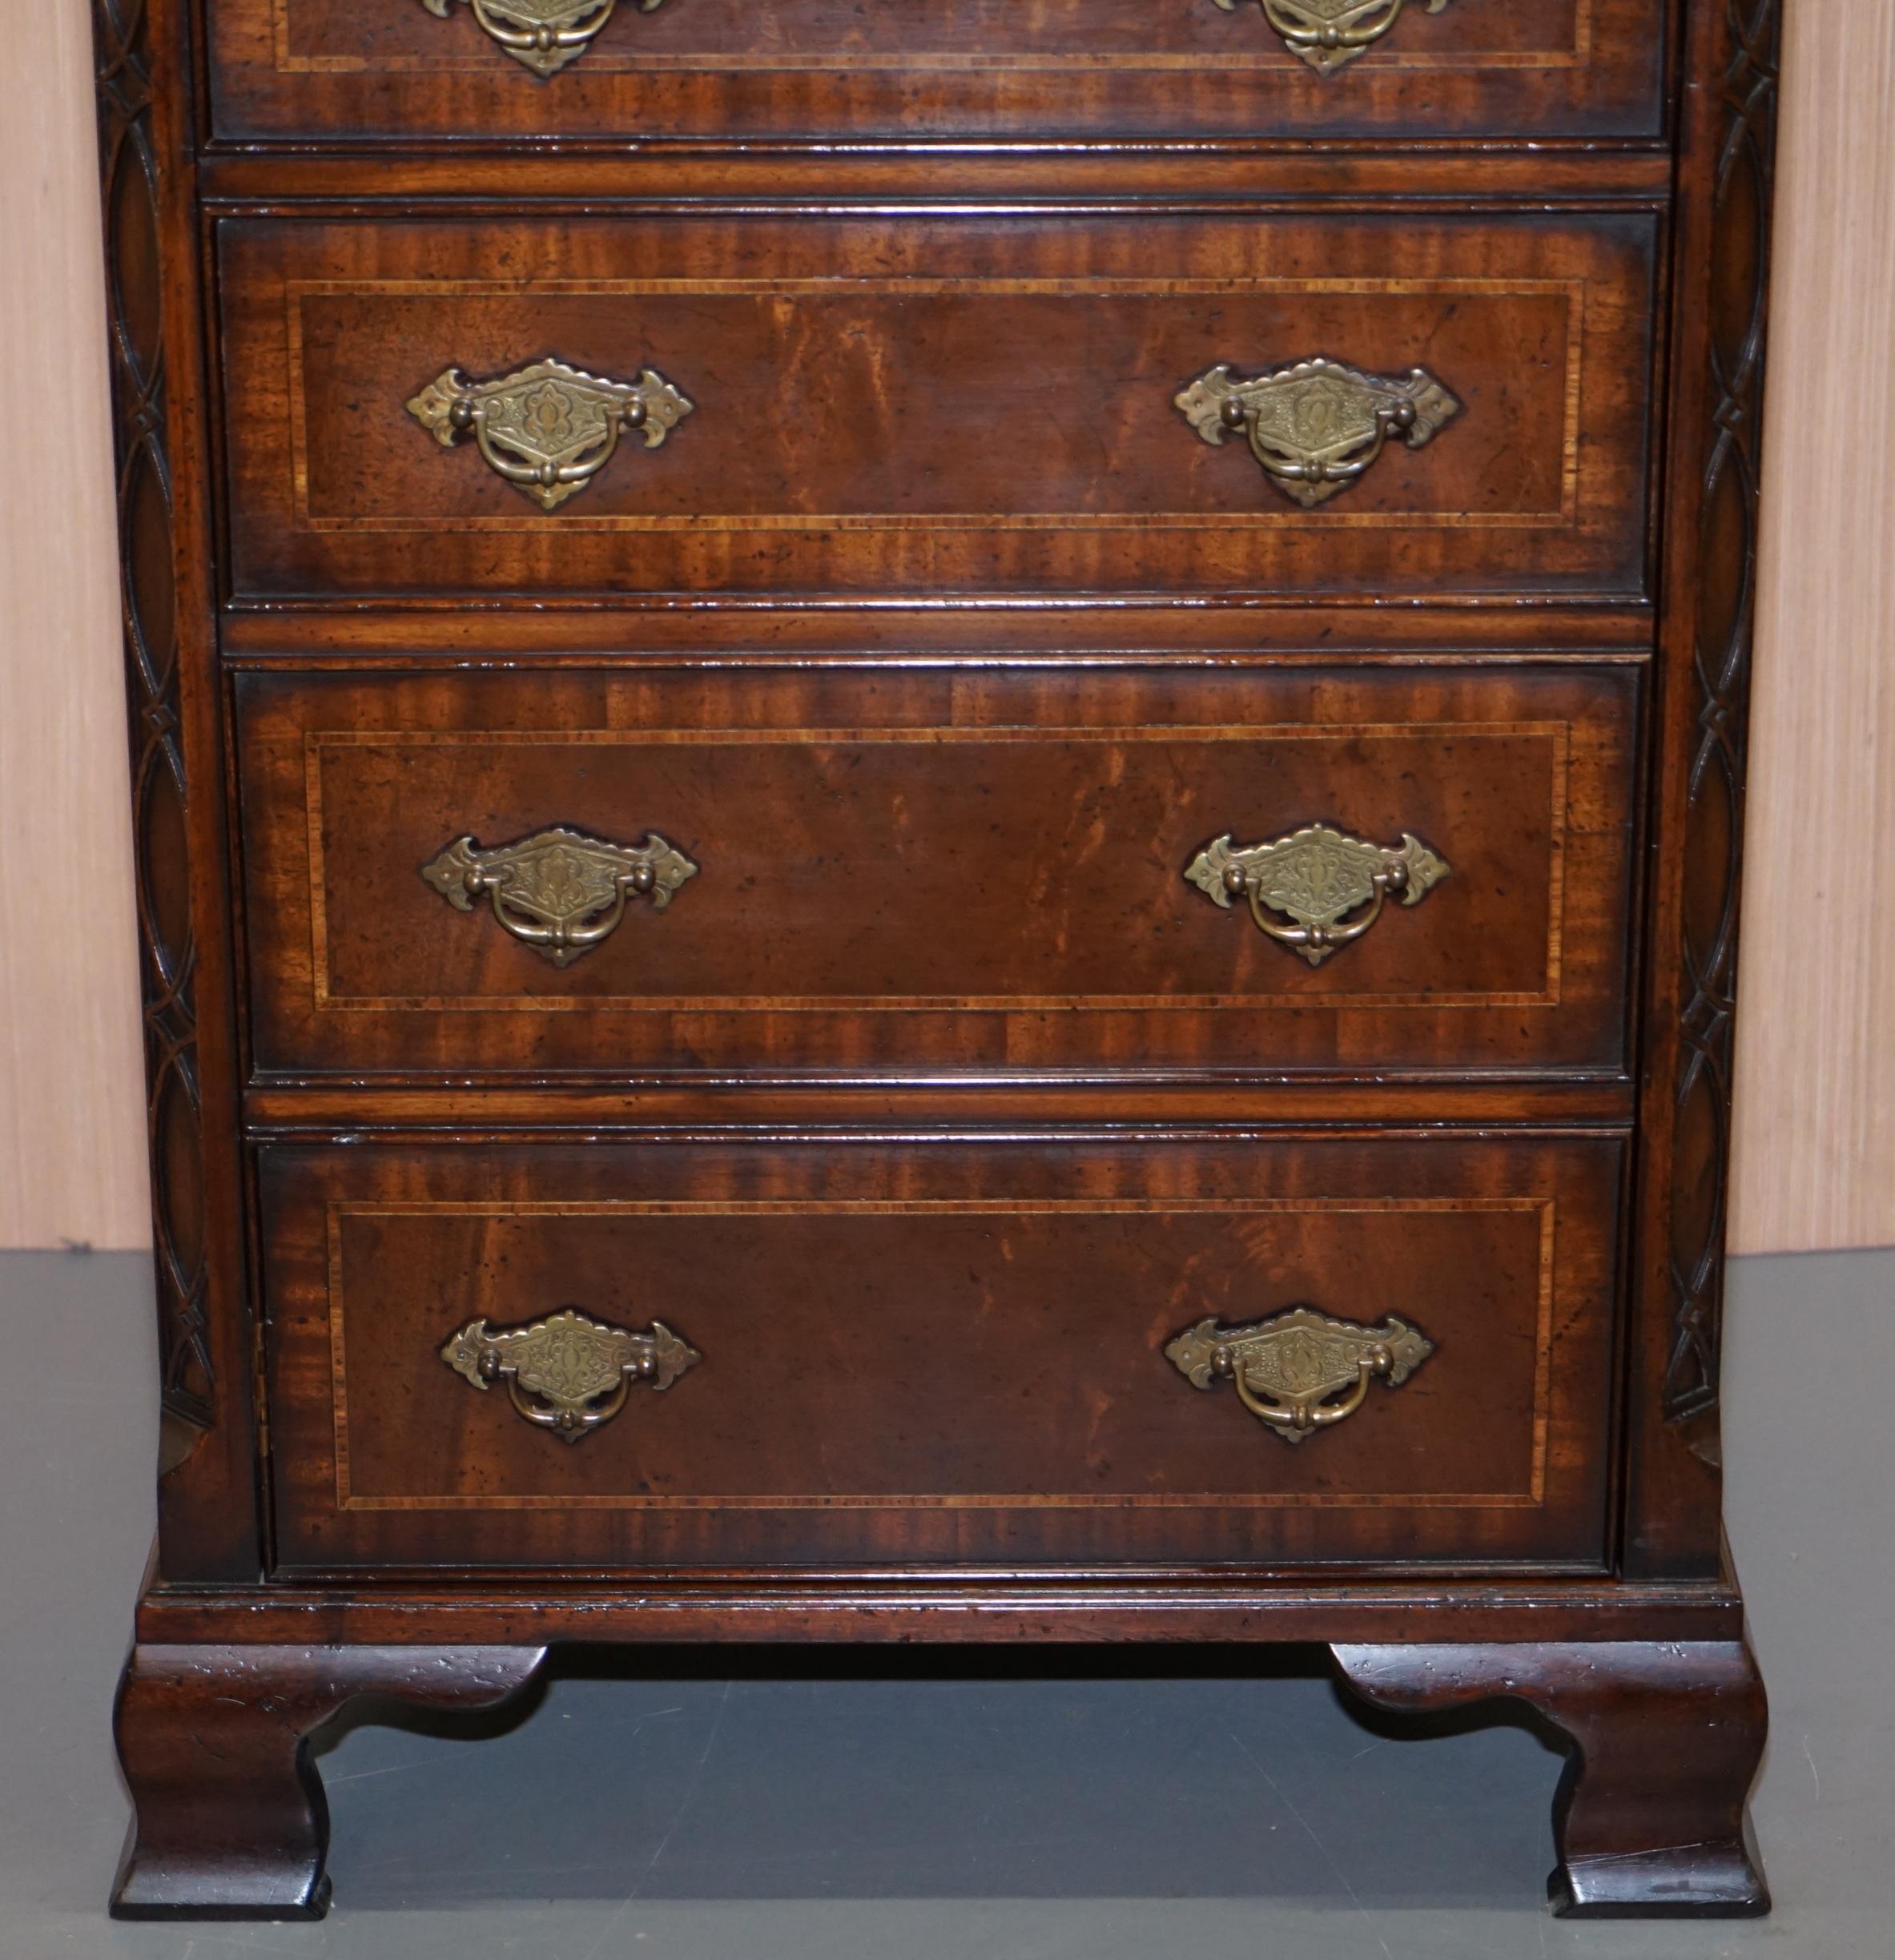 Hand-Crafted Stunning Record Player Cabinet Cupboard Hidden as Regency Chest of Drawers